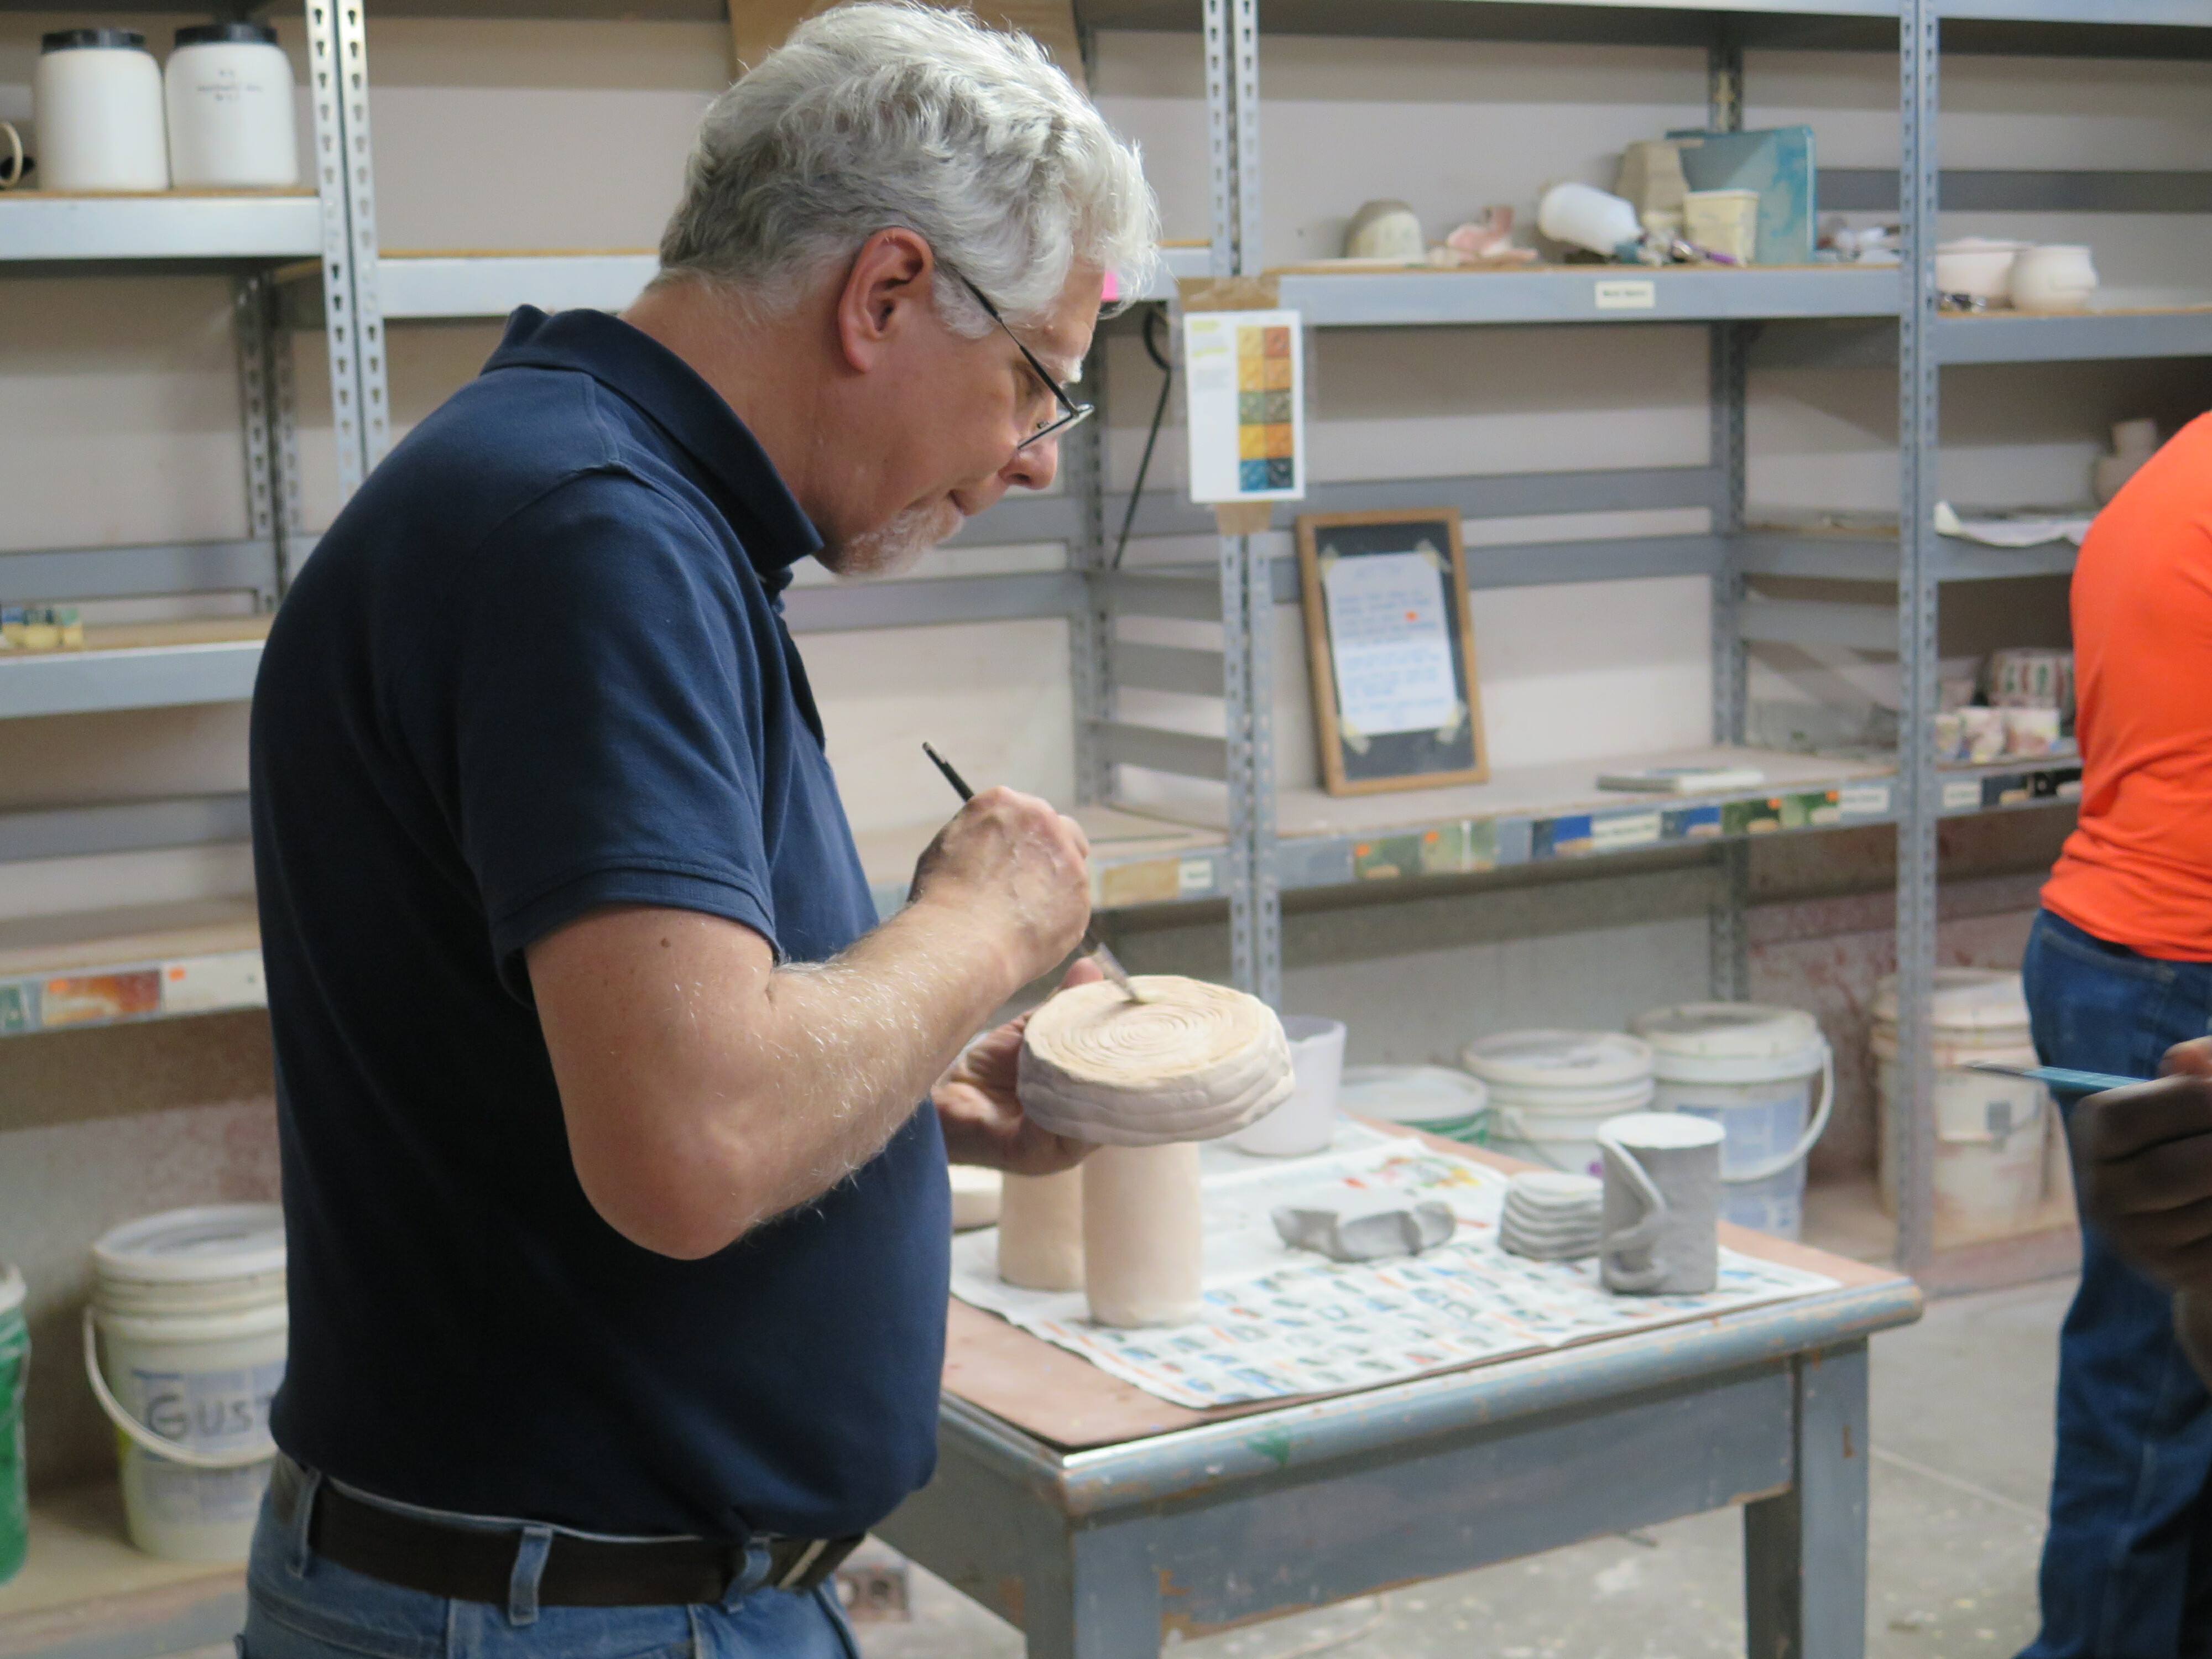 A man in a dark blue shirt is working on a ceramic piece, a tool is in his hand as he is working on the bottom. Behind him are shelves with difference ceramic pieces scattered.